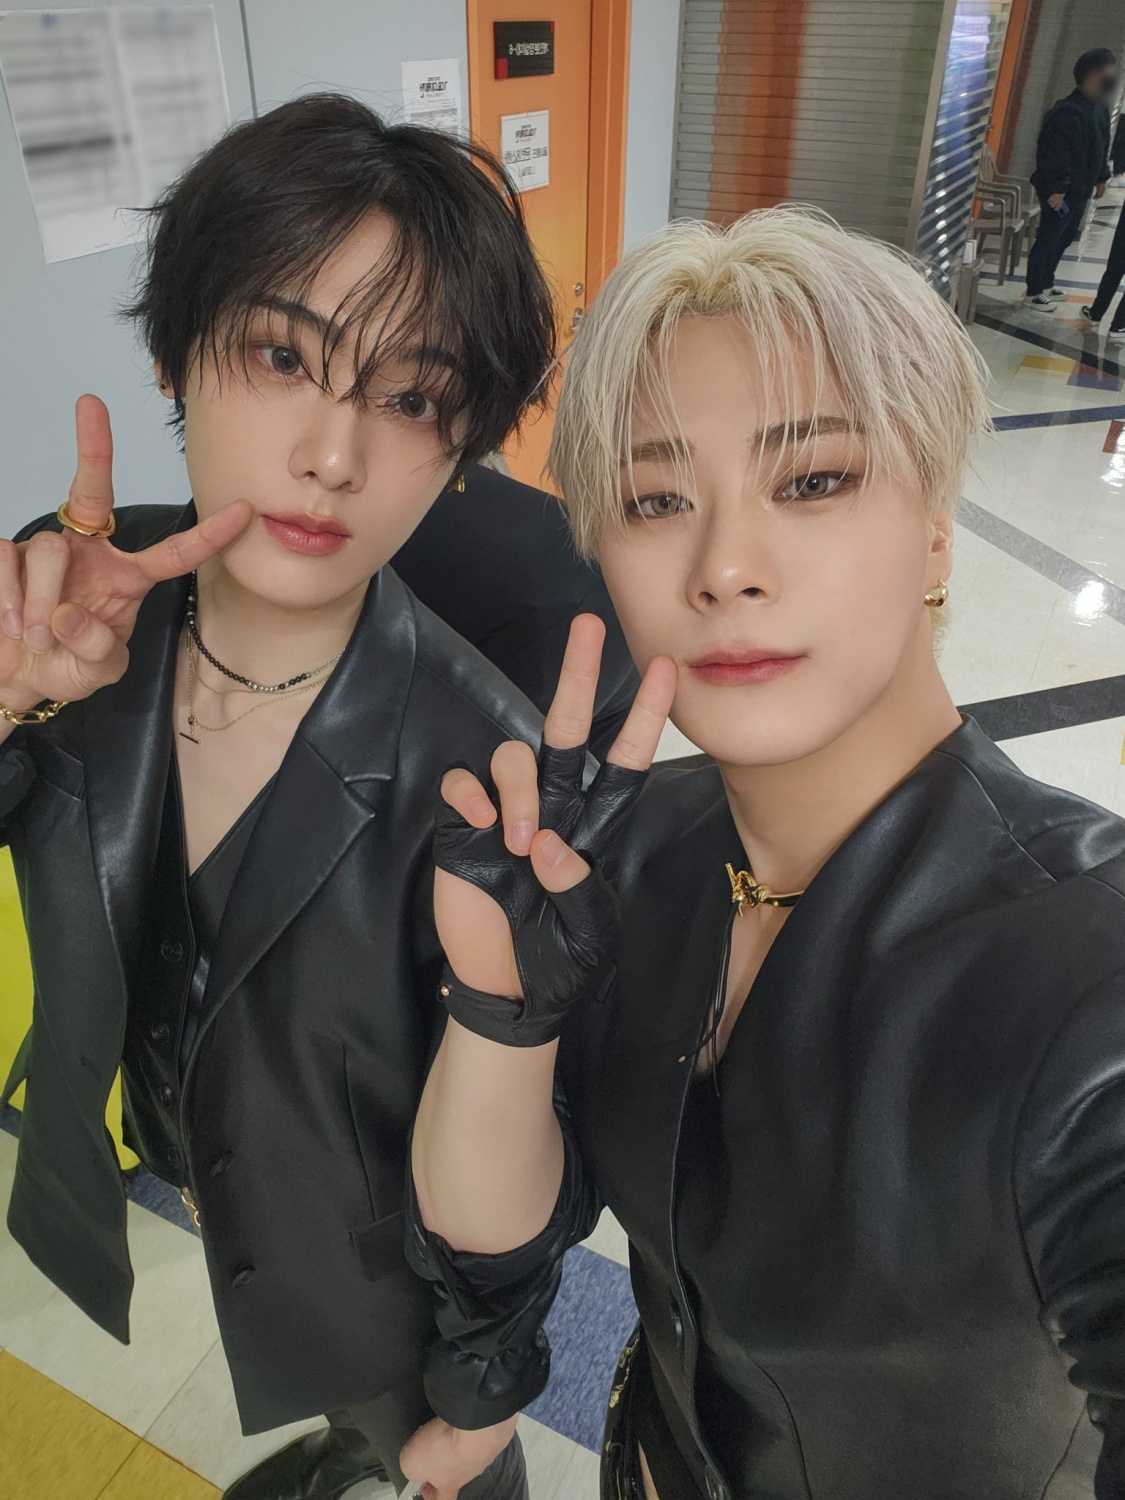 "The chemistry is getting bigger" MOONBIN&SANHA, comeback with deadly sexiness